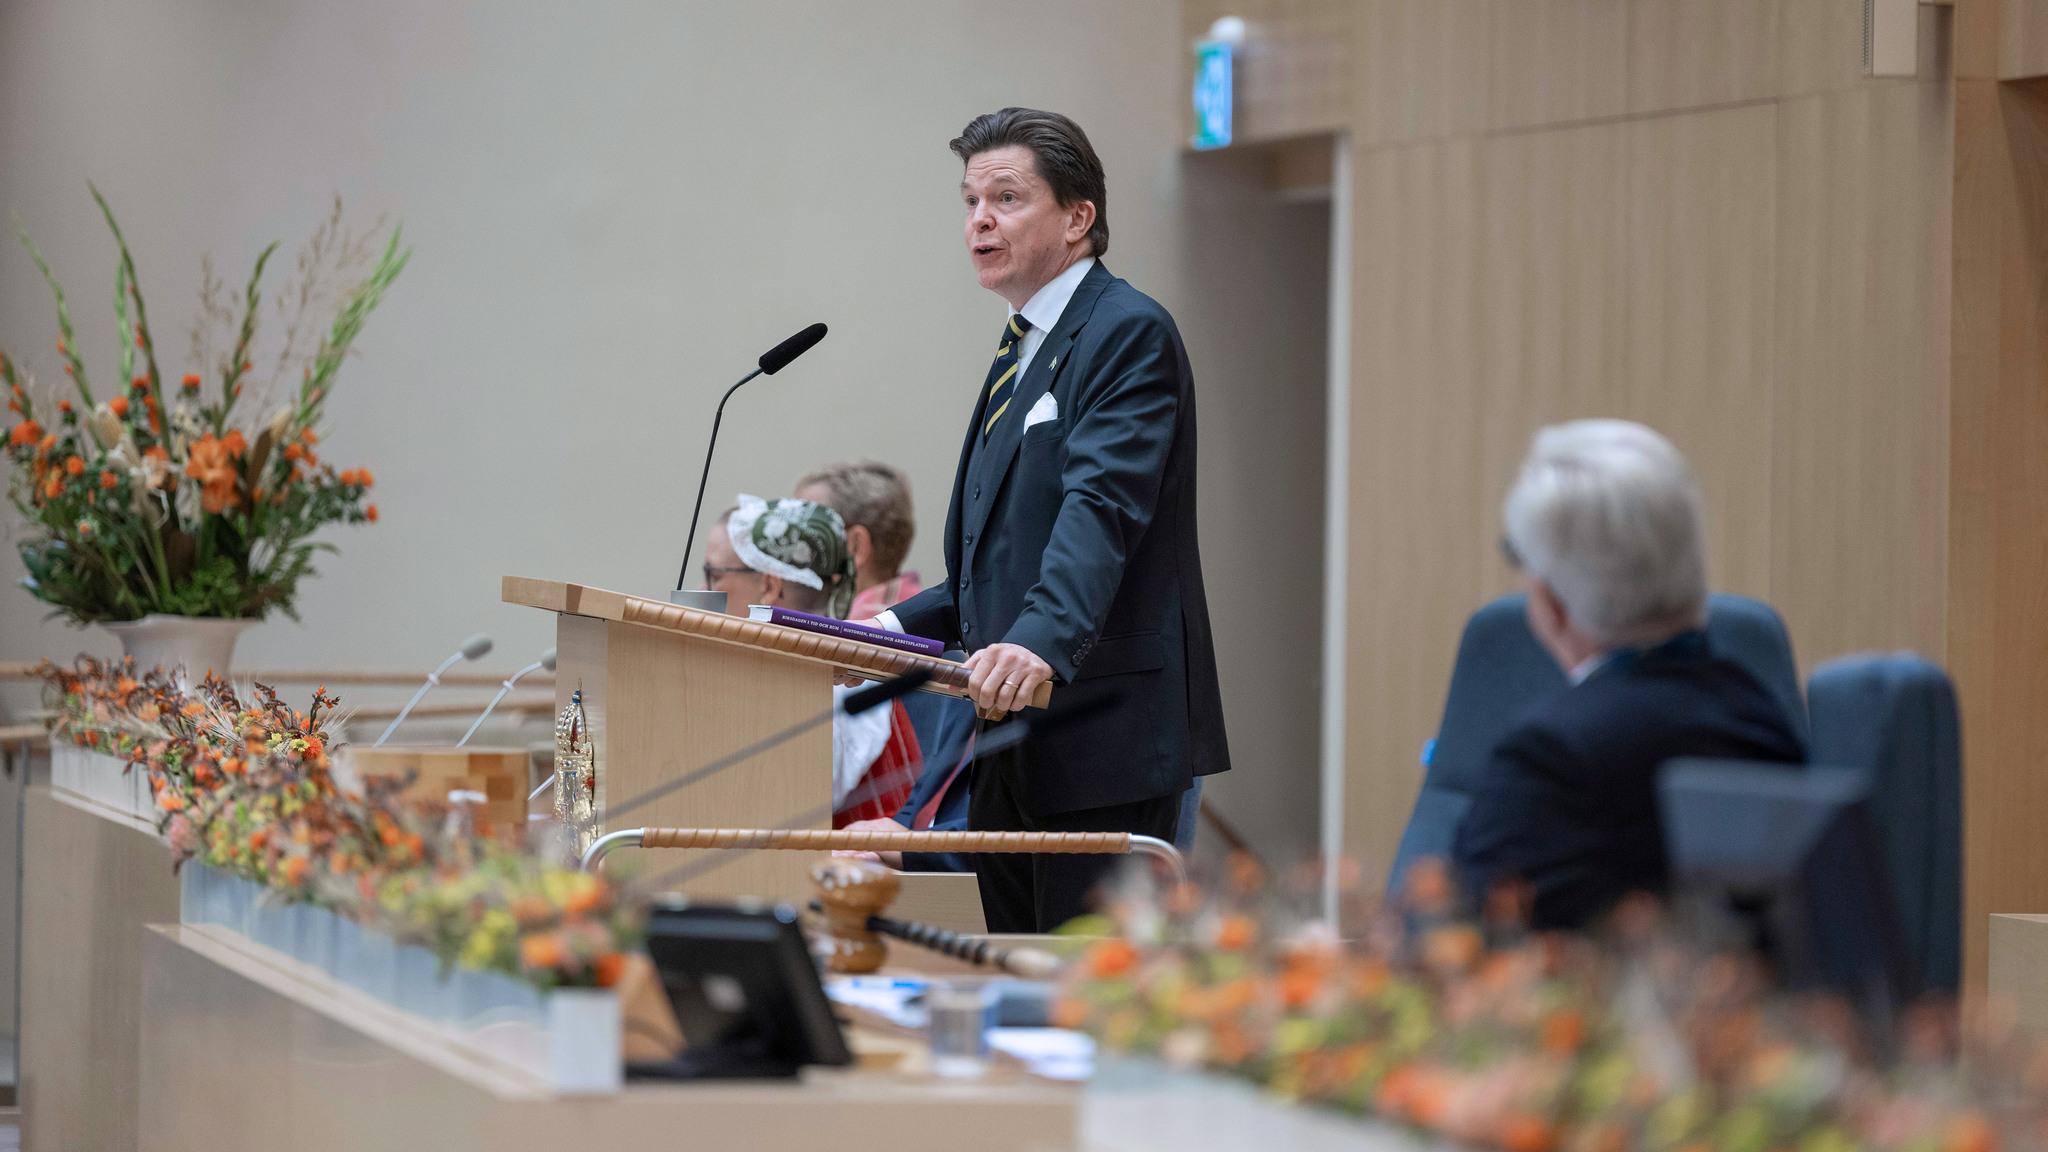 A man stands on a podium, with a microphone. Photo from the Swedish parliament, an important part of Swedish government.